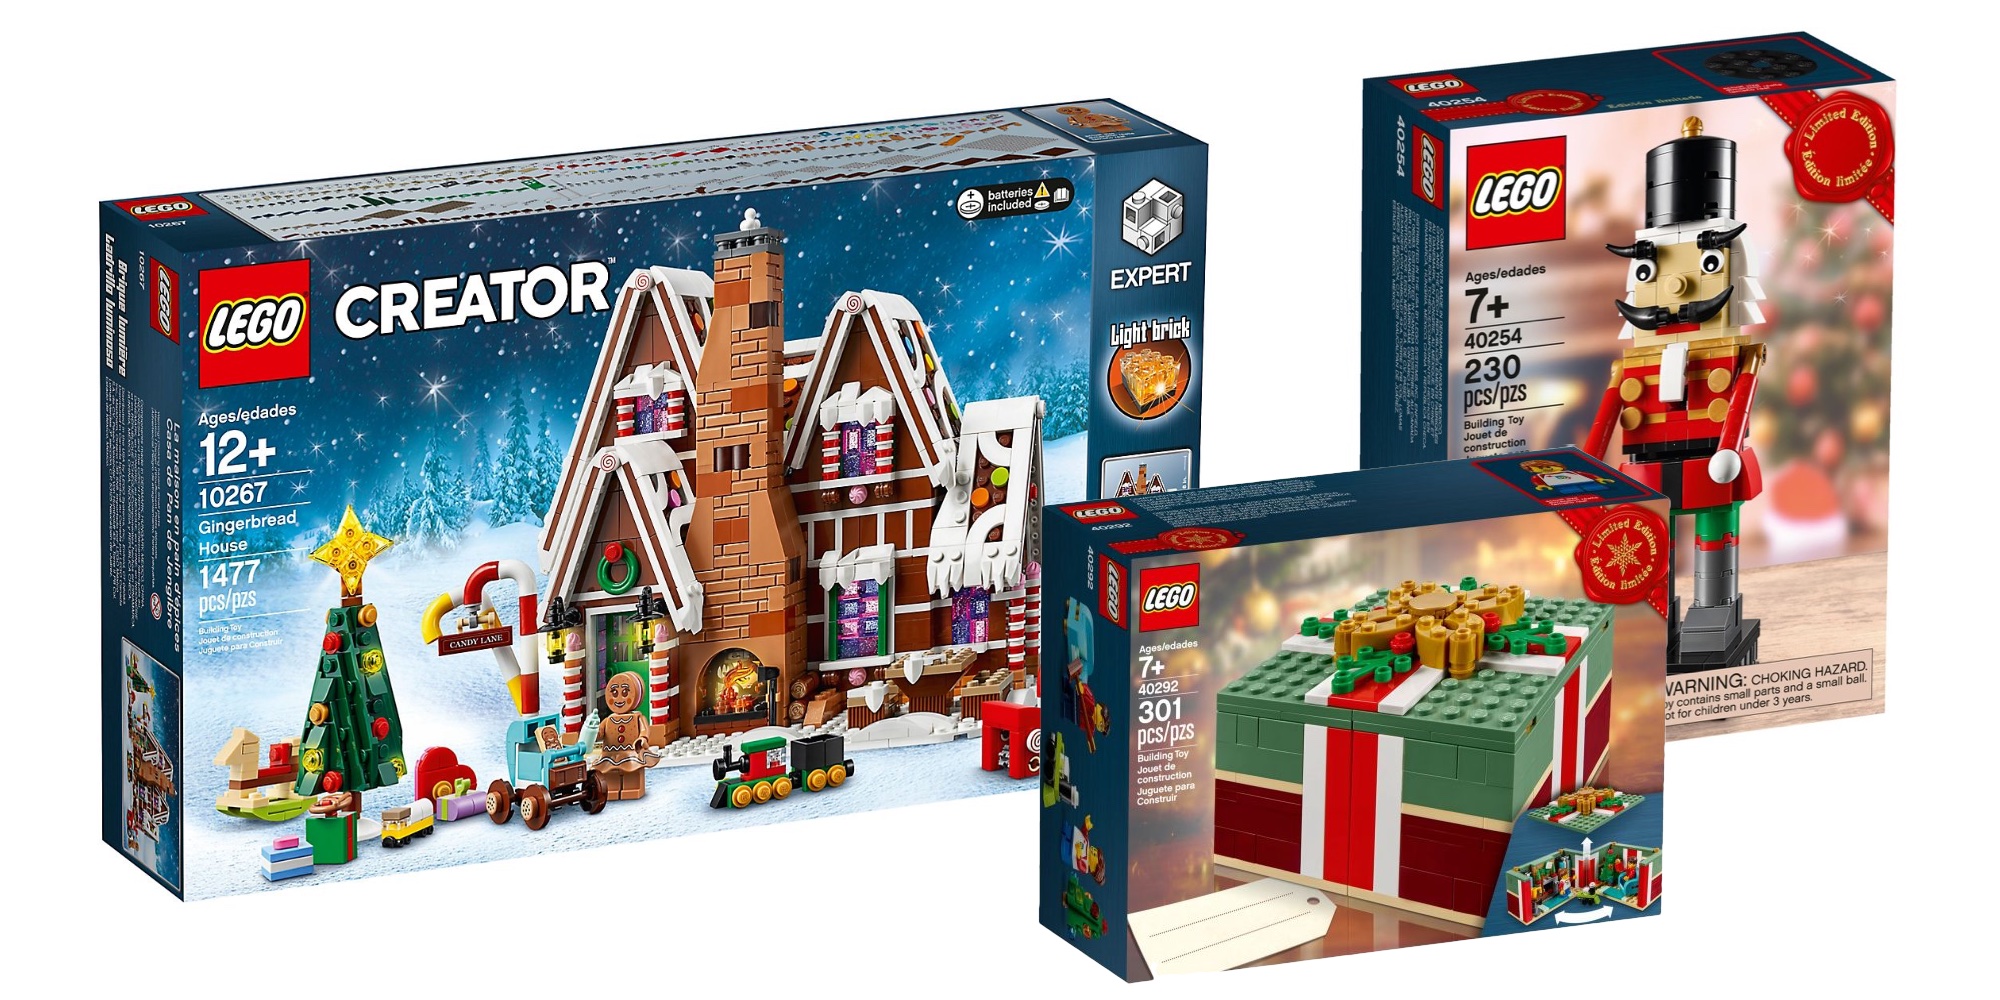 LEGO Black Friday predictions: Exclusives, freebies, more - 9to5Toys